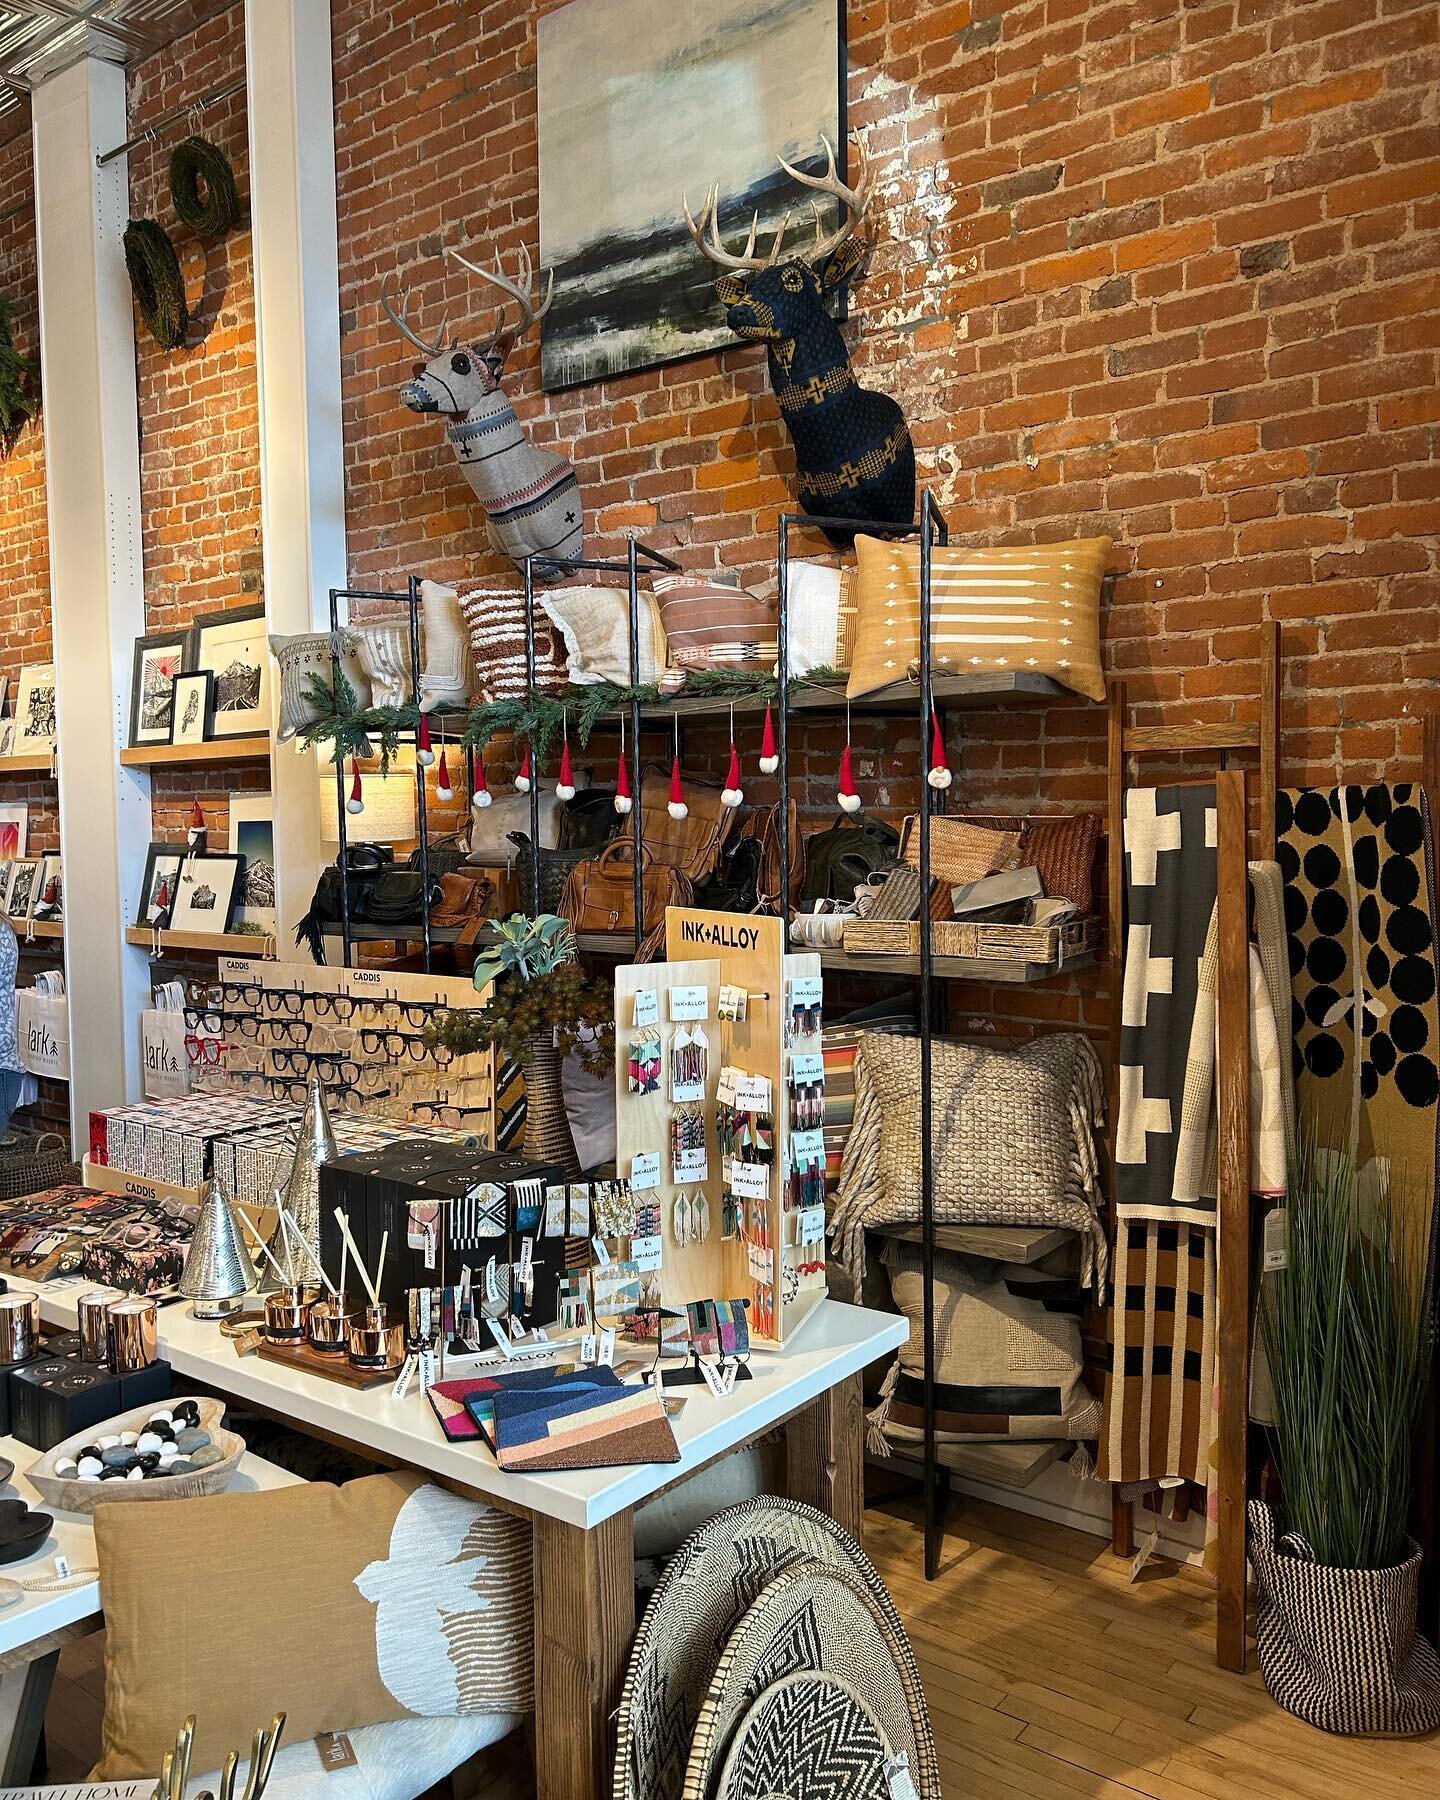 My travels took me to beautiful Bend, OR last week. Got lots of inspo from these amazing local stores!